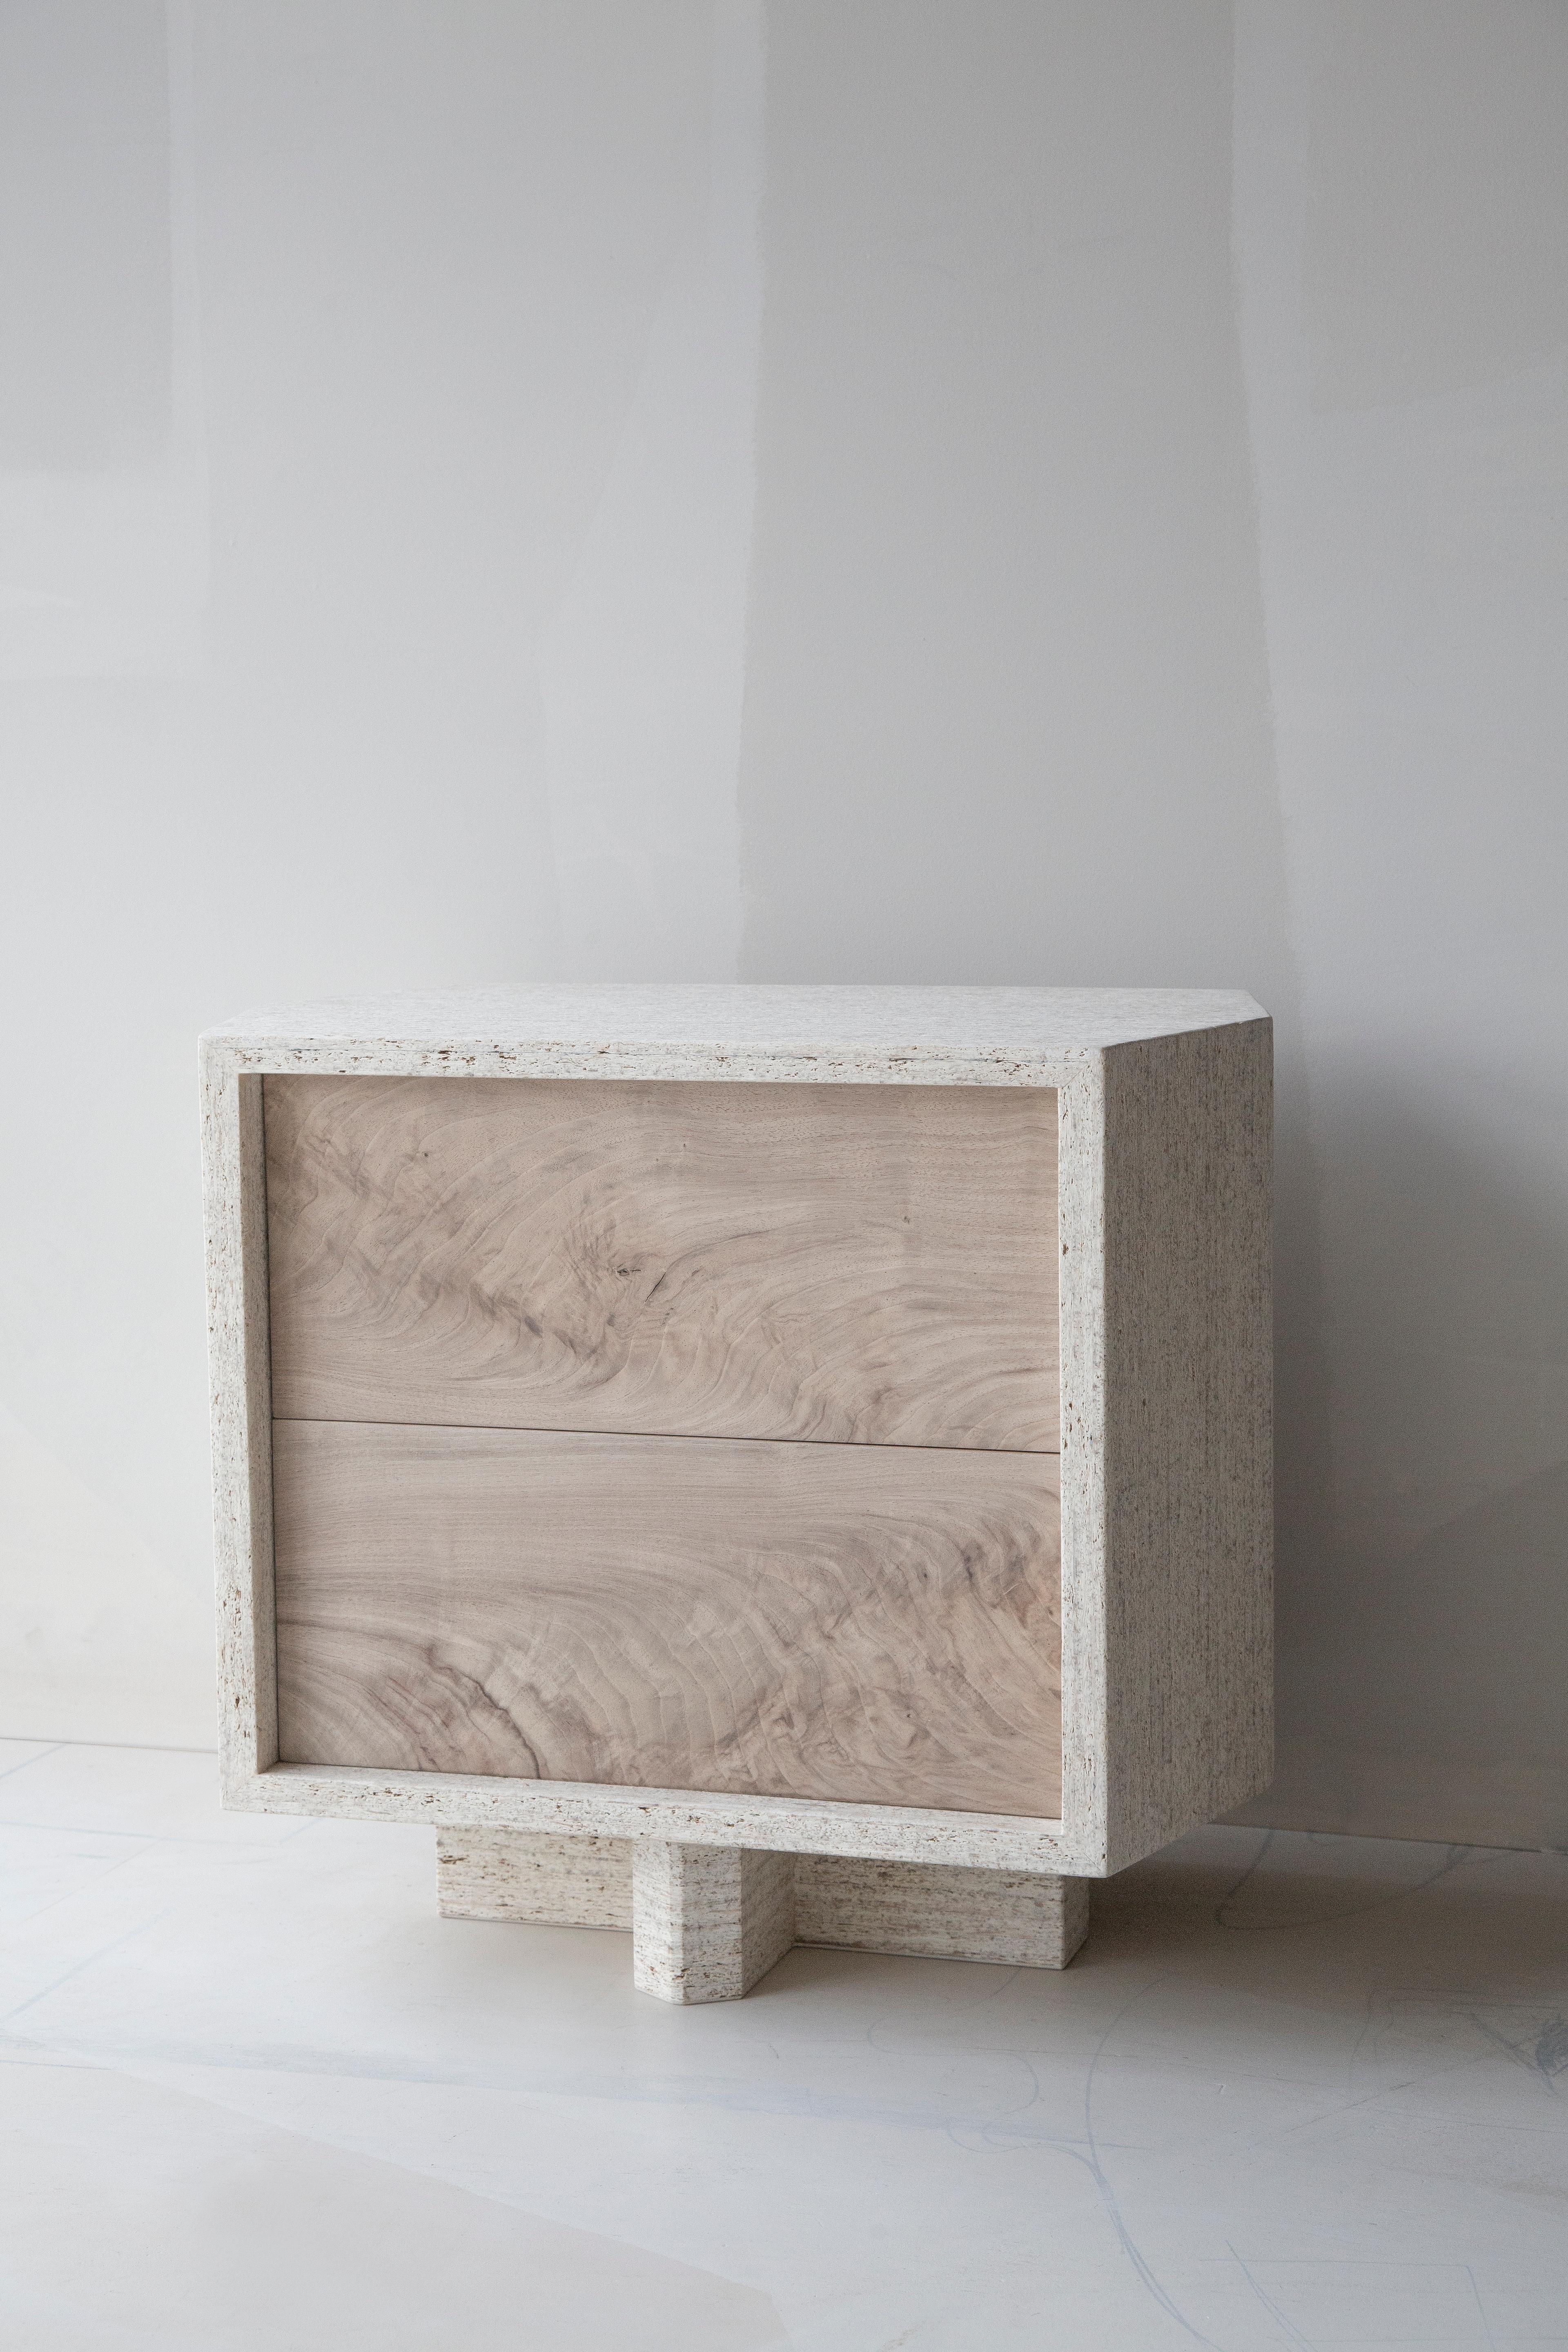 Brutalist and modern architecturally inspired side table or nightstand is available with a floor base or wall mountable without base. Each table is fabricated by hand and available to order in a combination of finish options. Inner drawer portholes